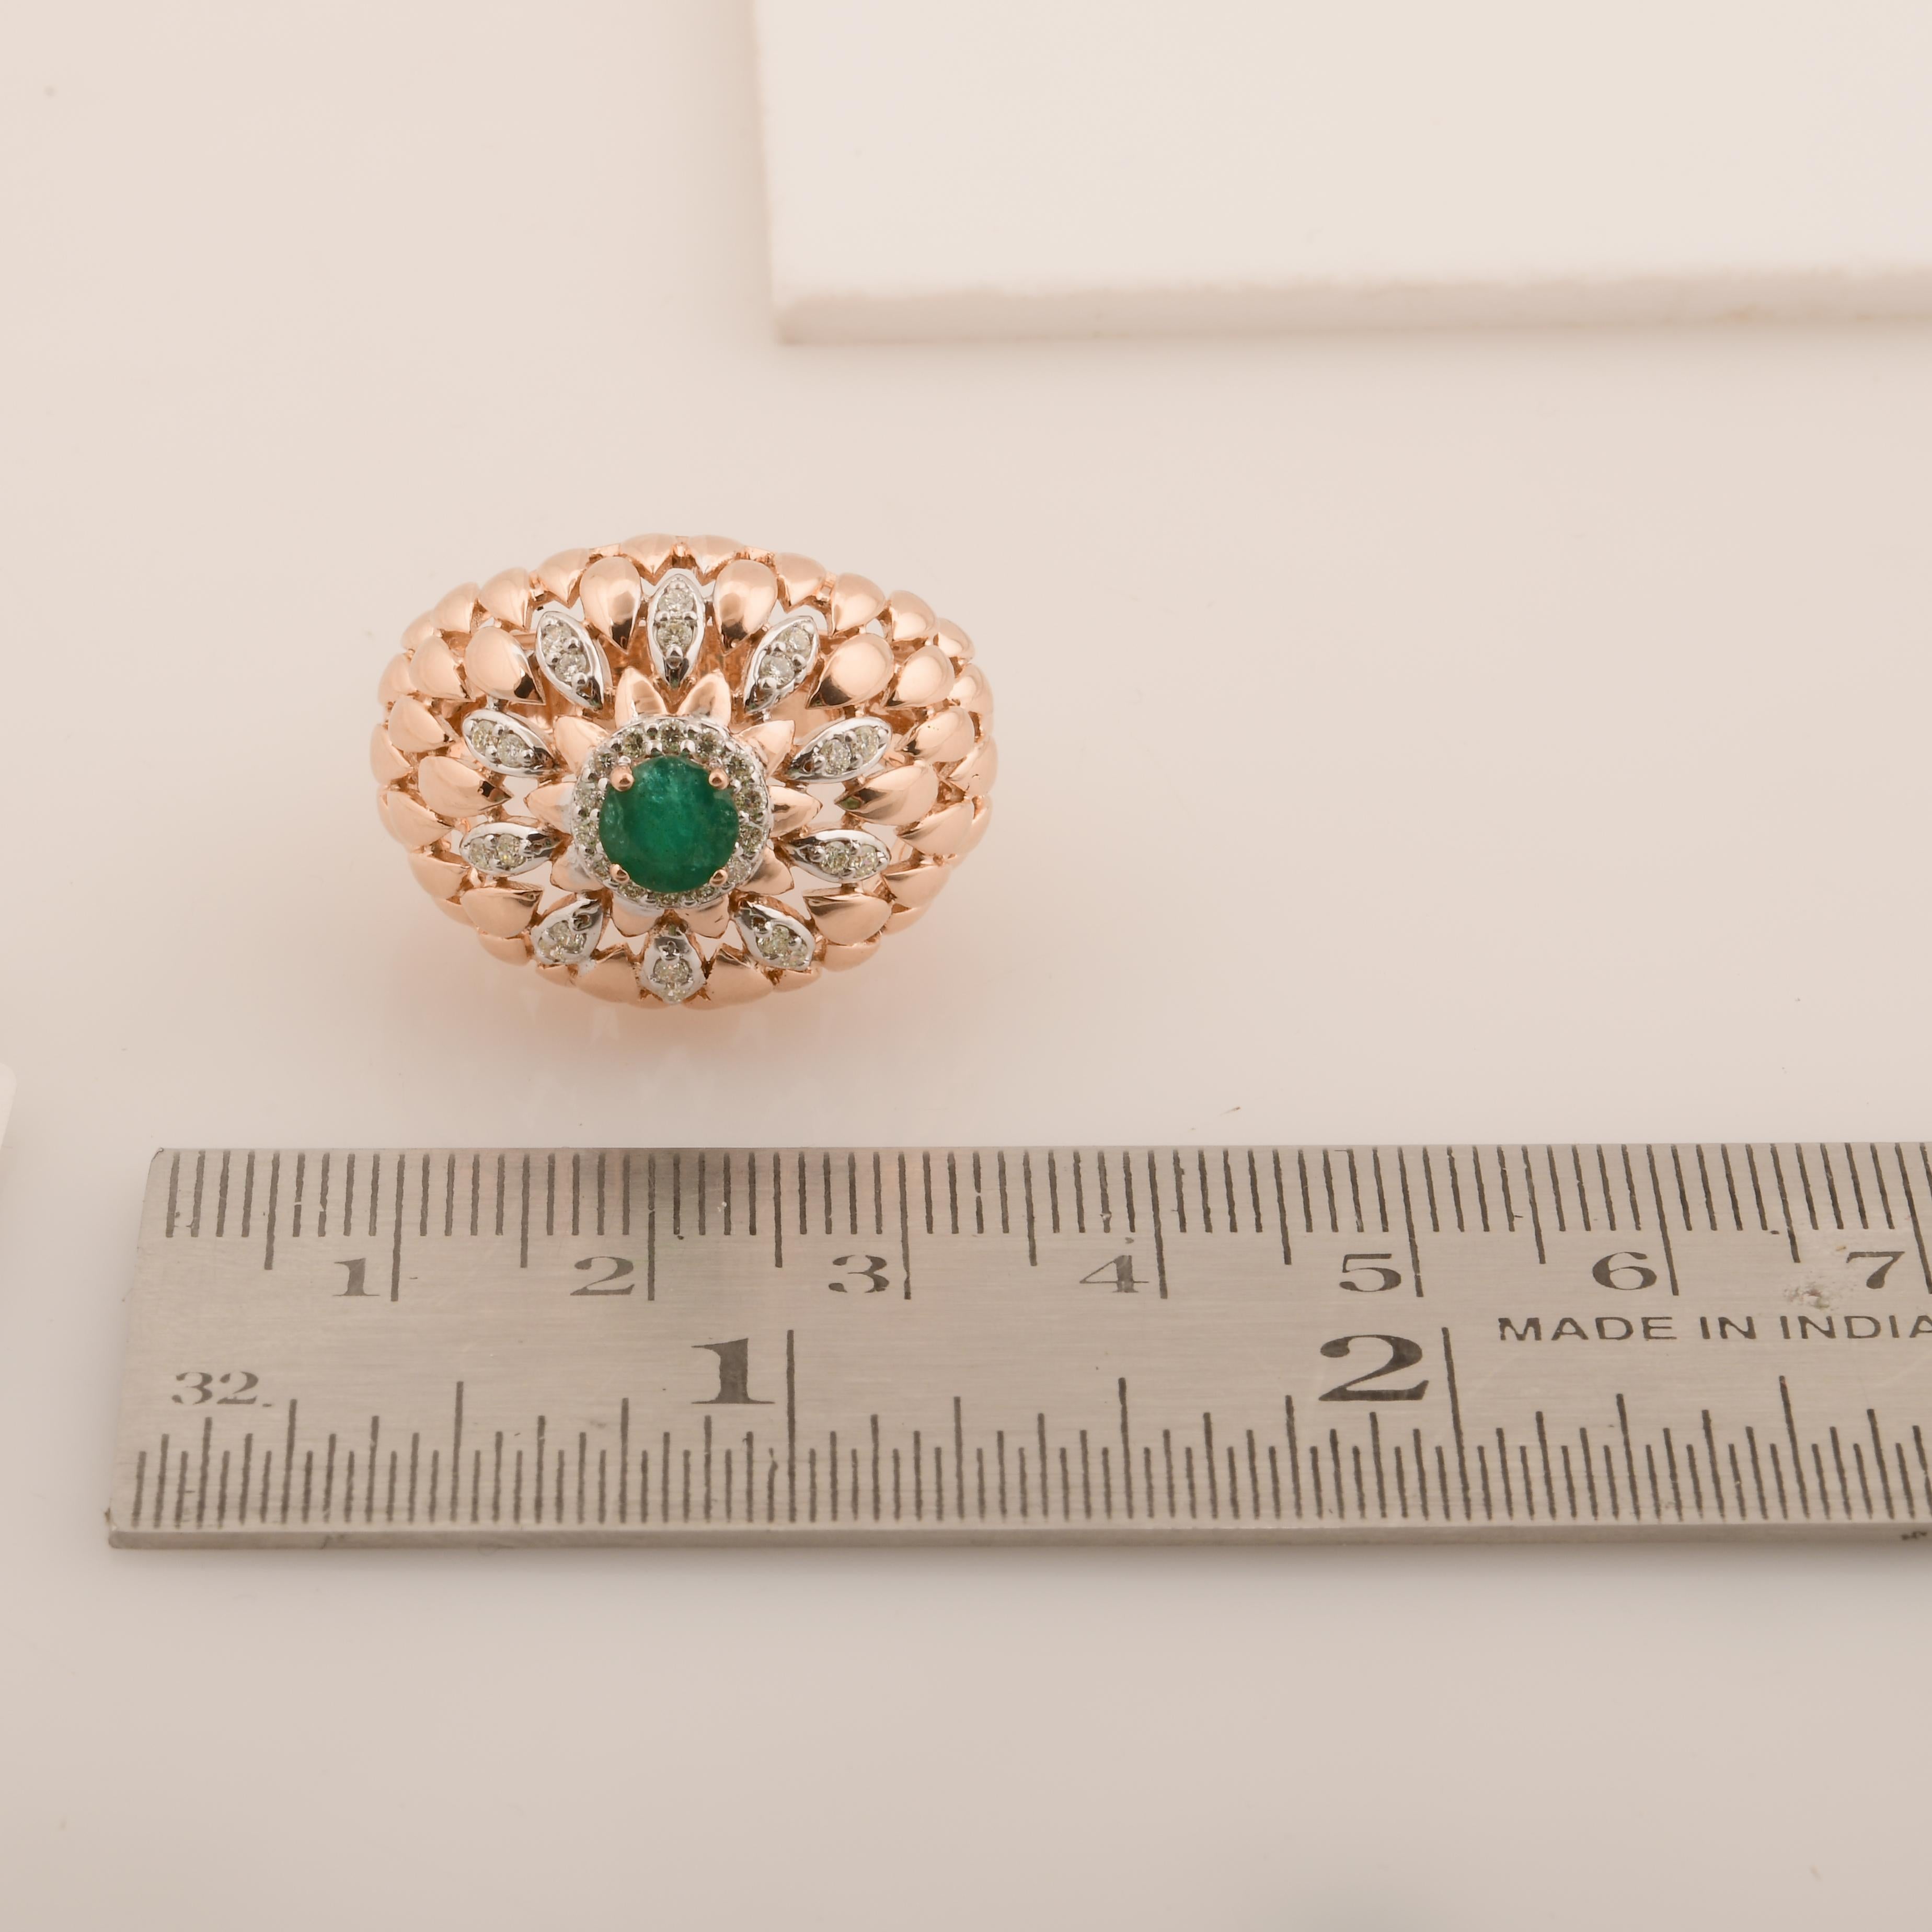 For Sale:  Natural Emerald Gemstone Dome Ring Diamond Pave Solid 18k Rose Gold Fine Jewelry 7